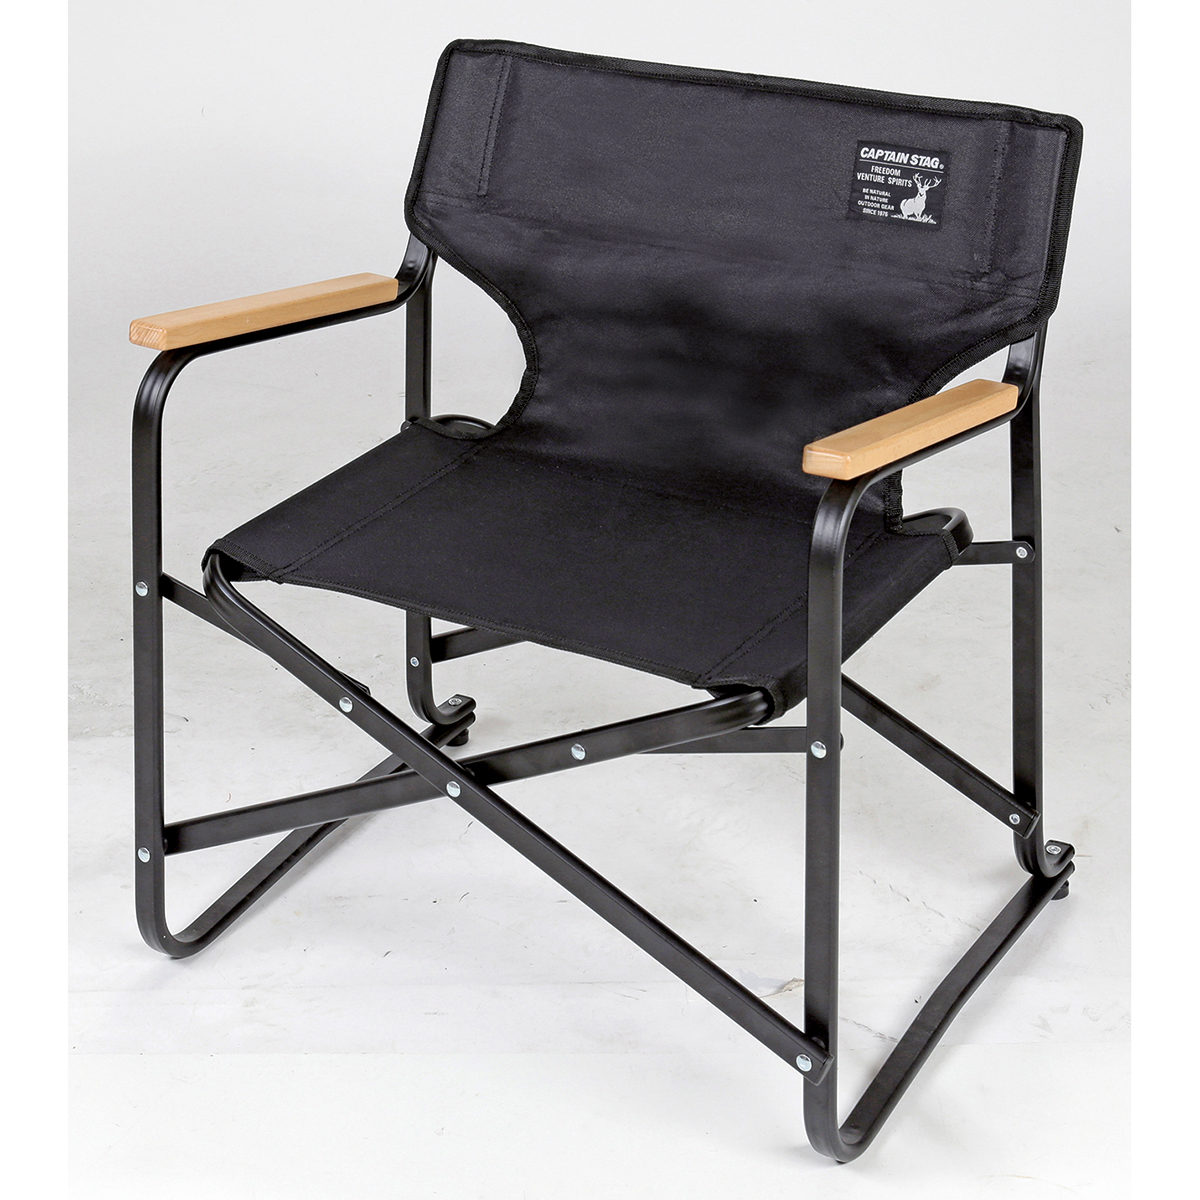 CAPTAIN STAG BLACK LABEL LOW STYLE DIRECTOR CHAIR MINI